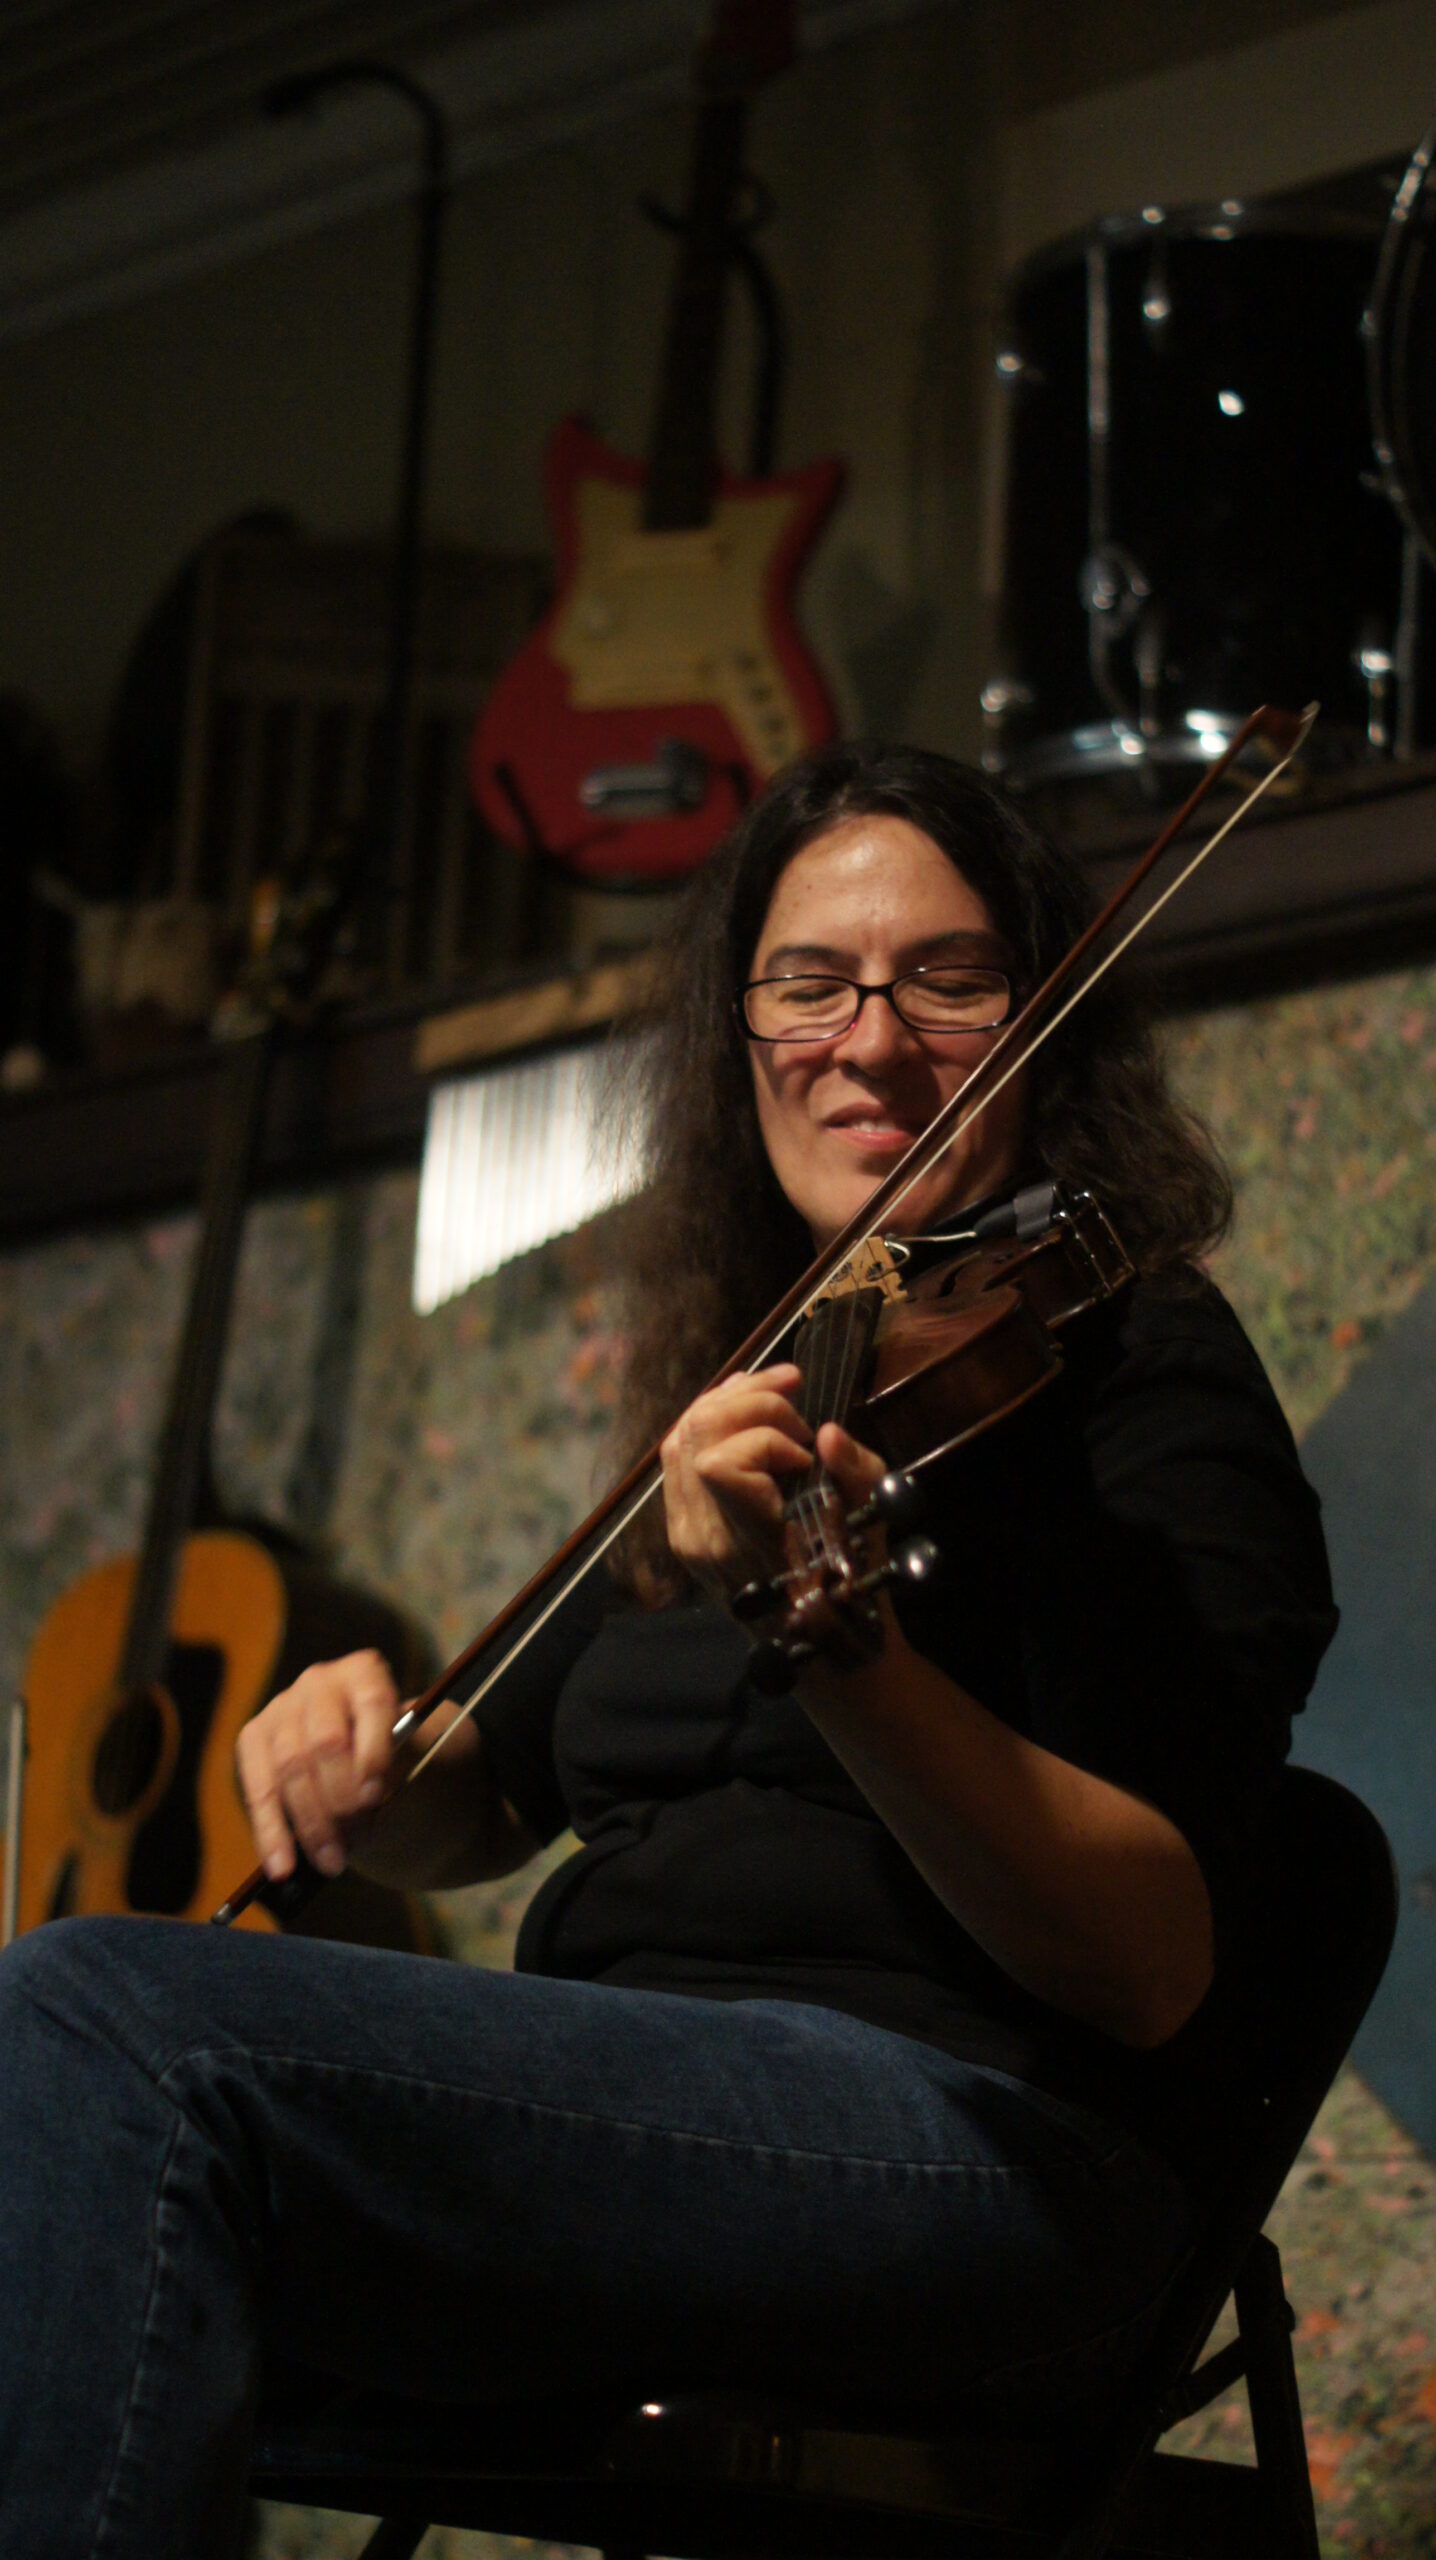 Bread and Butter Licks for Cajun Fiddle with Gina Forsyth